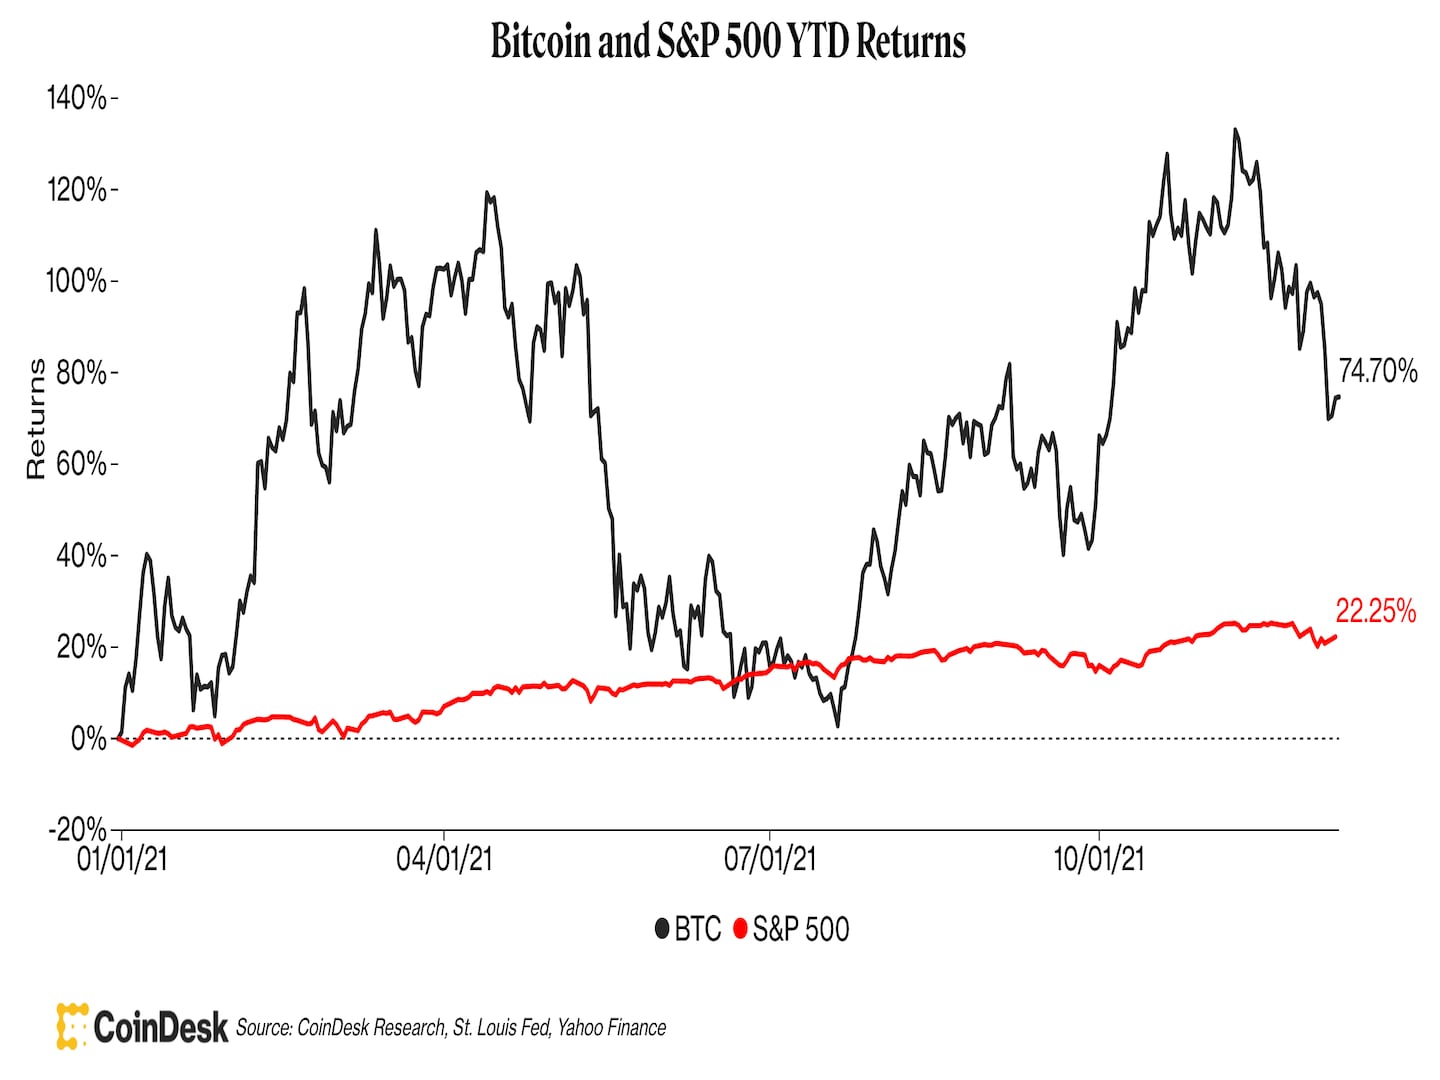 Bitcoin and S&P 500 returns so far (CoinDesk)